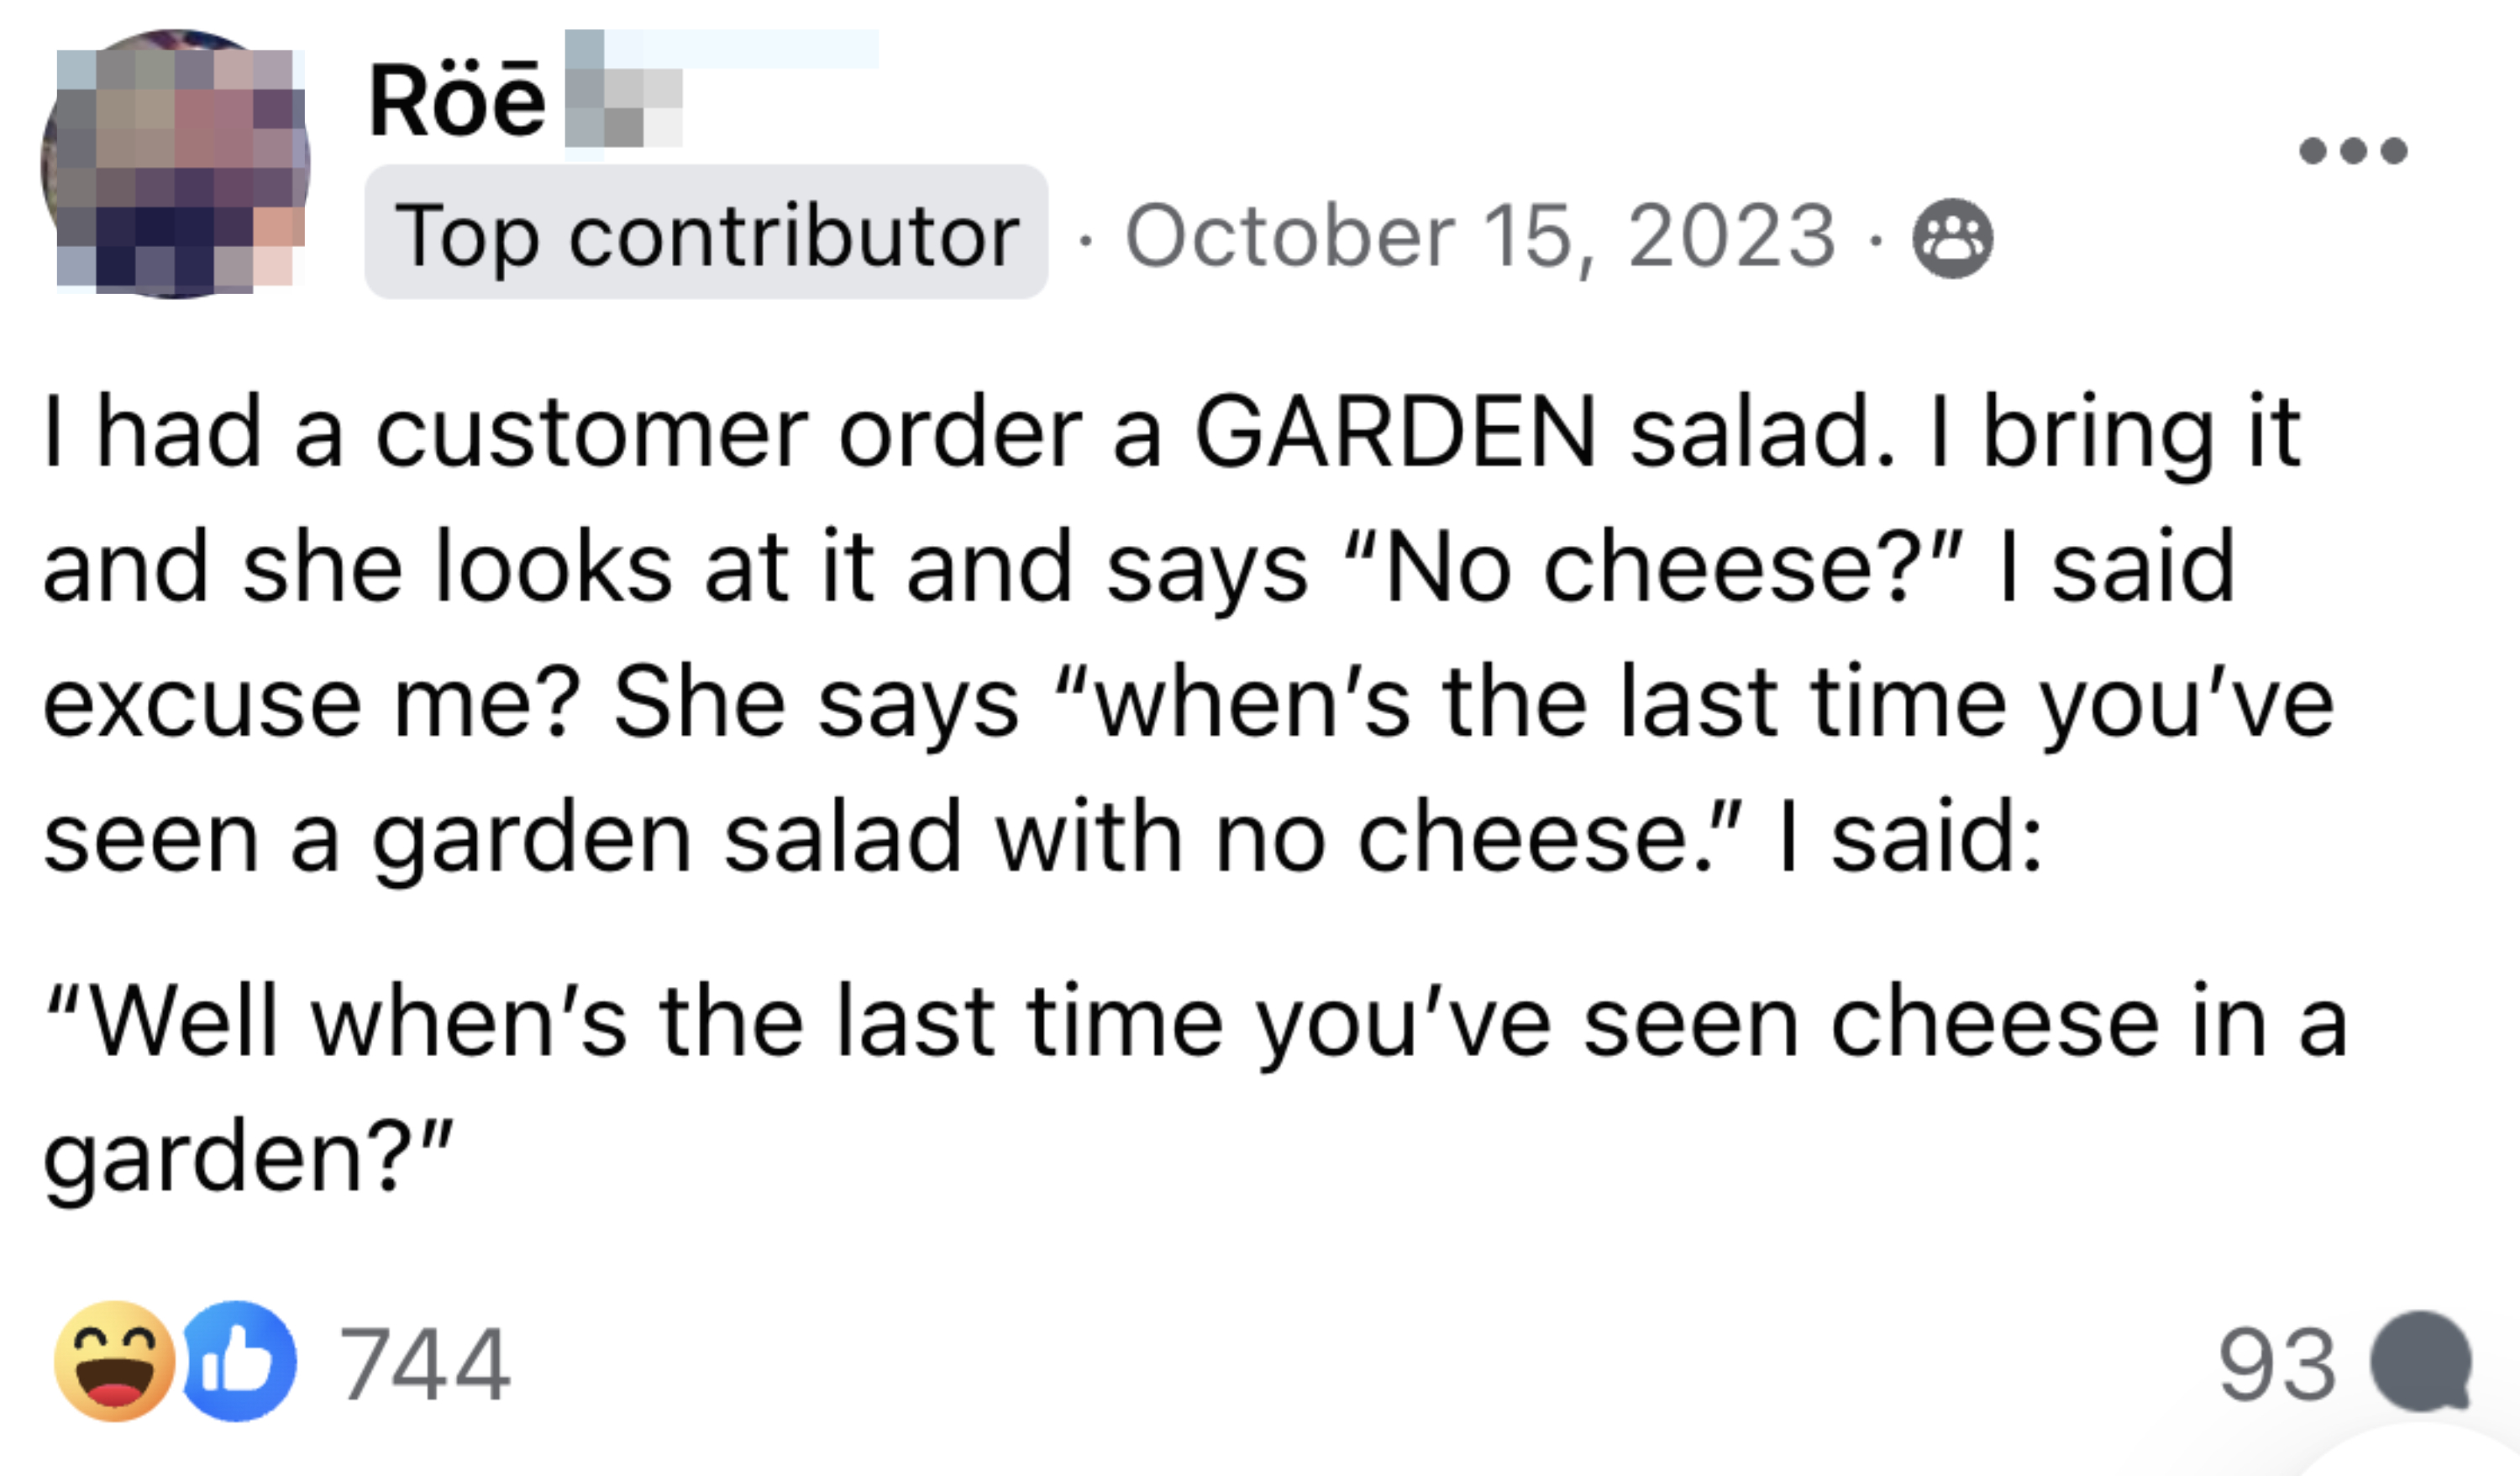 A screenshot of a social media post sharing a humorous exchange about a garden salad without cheese